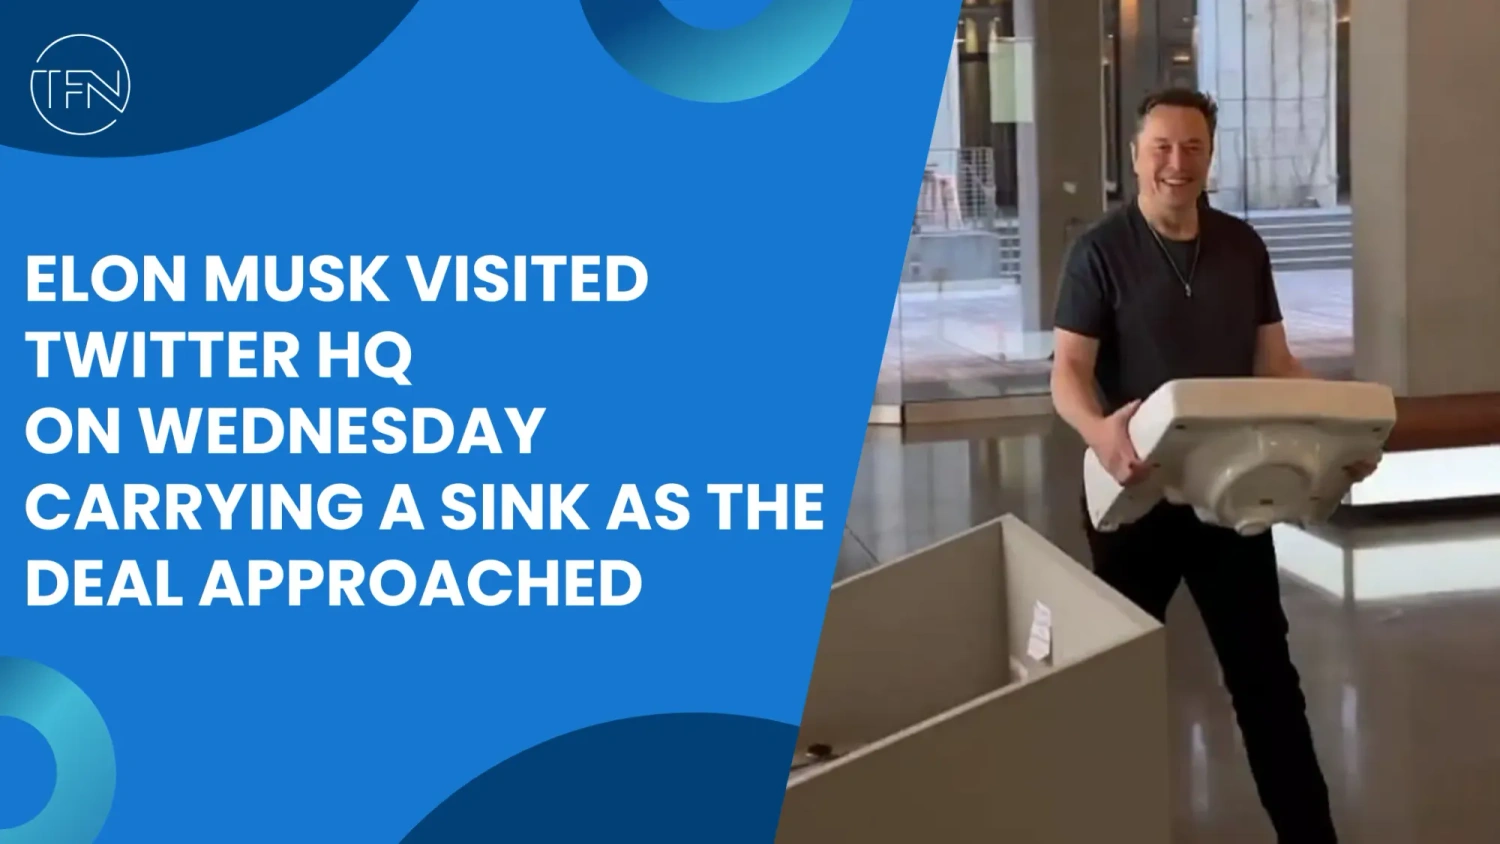 Elon Musk Visited Twitter HQ on Wednesday Carrying a Sink as the deal approached